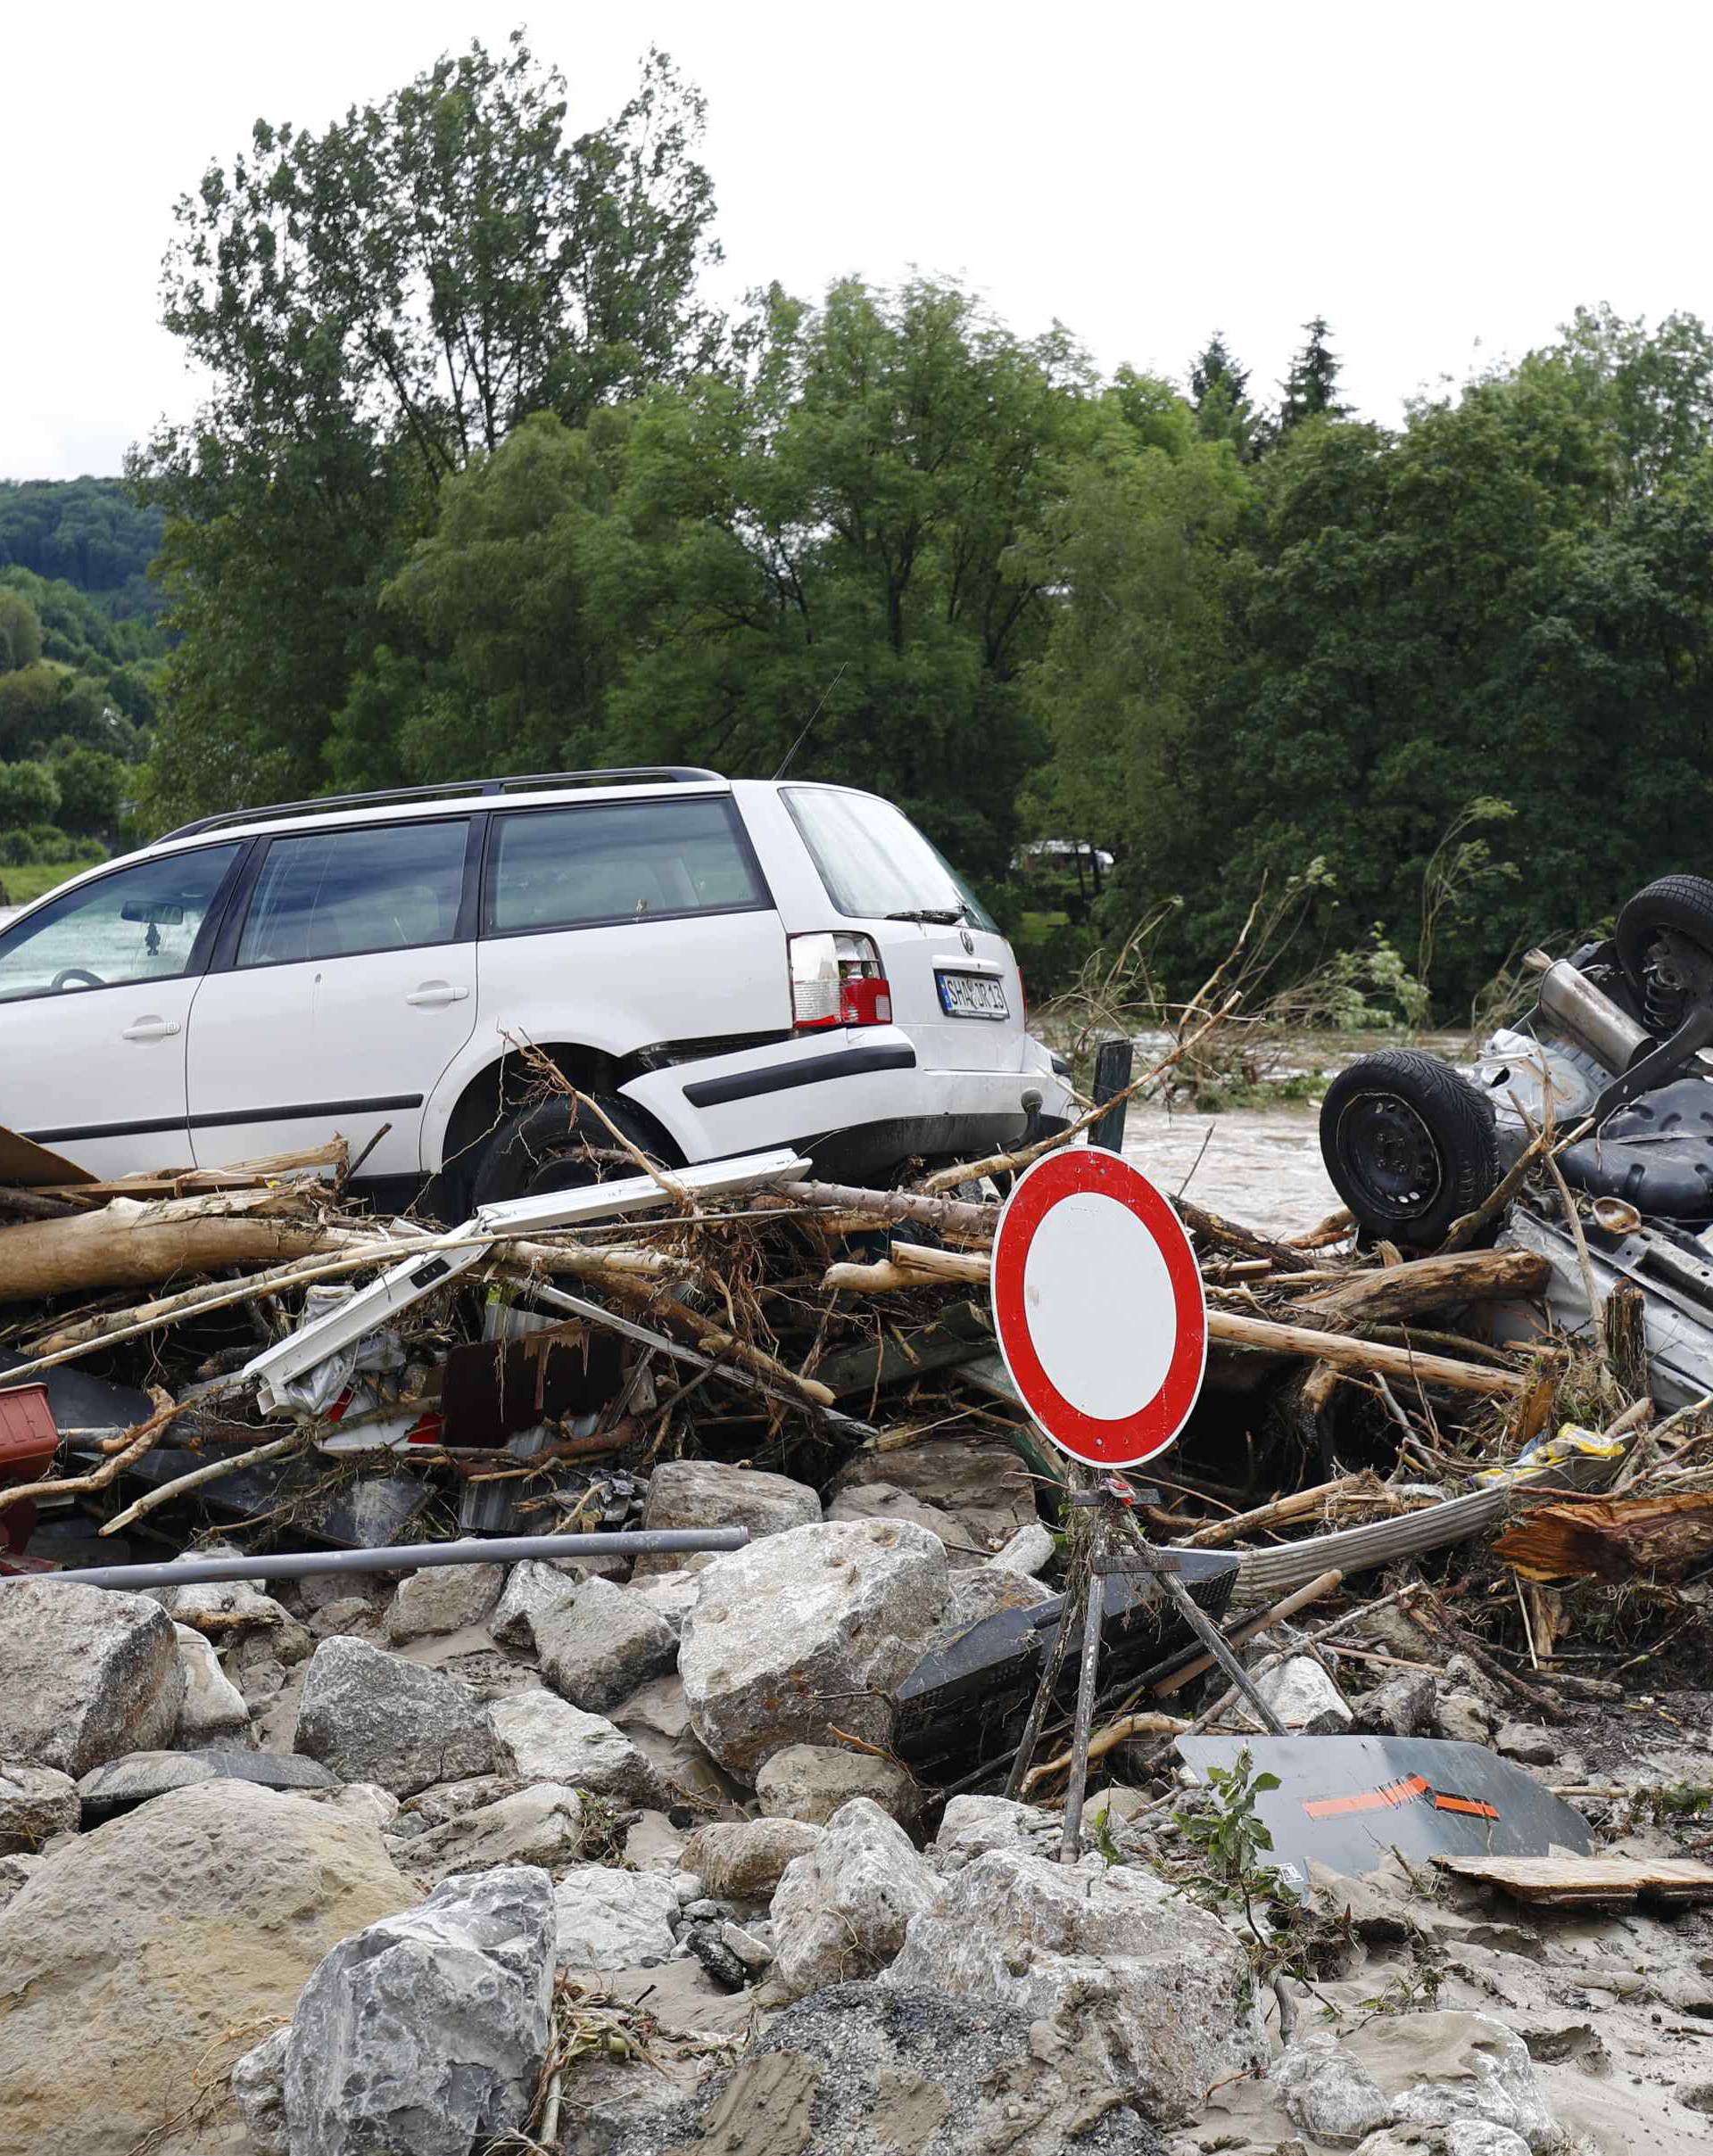 Cars lie amongst debris following floods in the town of Braunsbach in Baden-Wuerttemberg